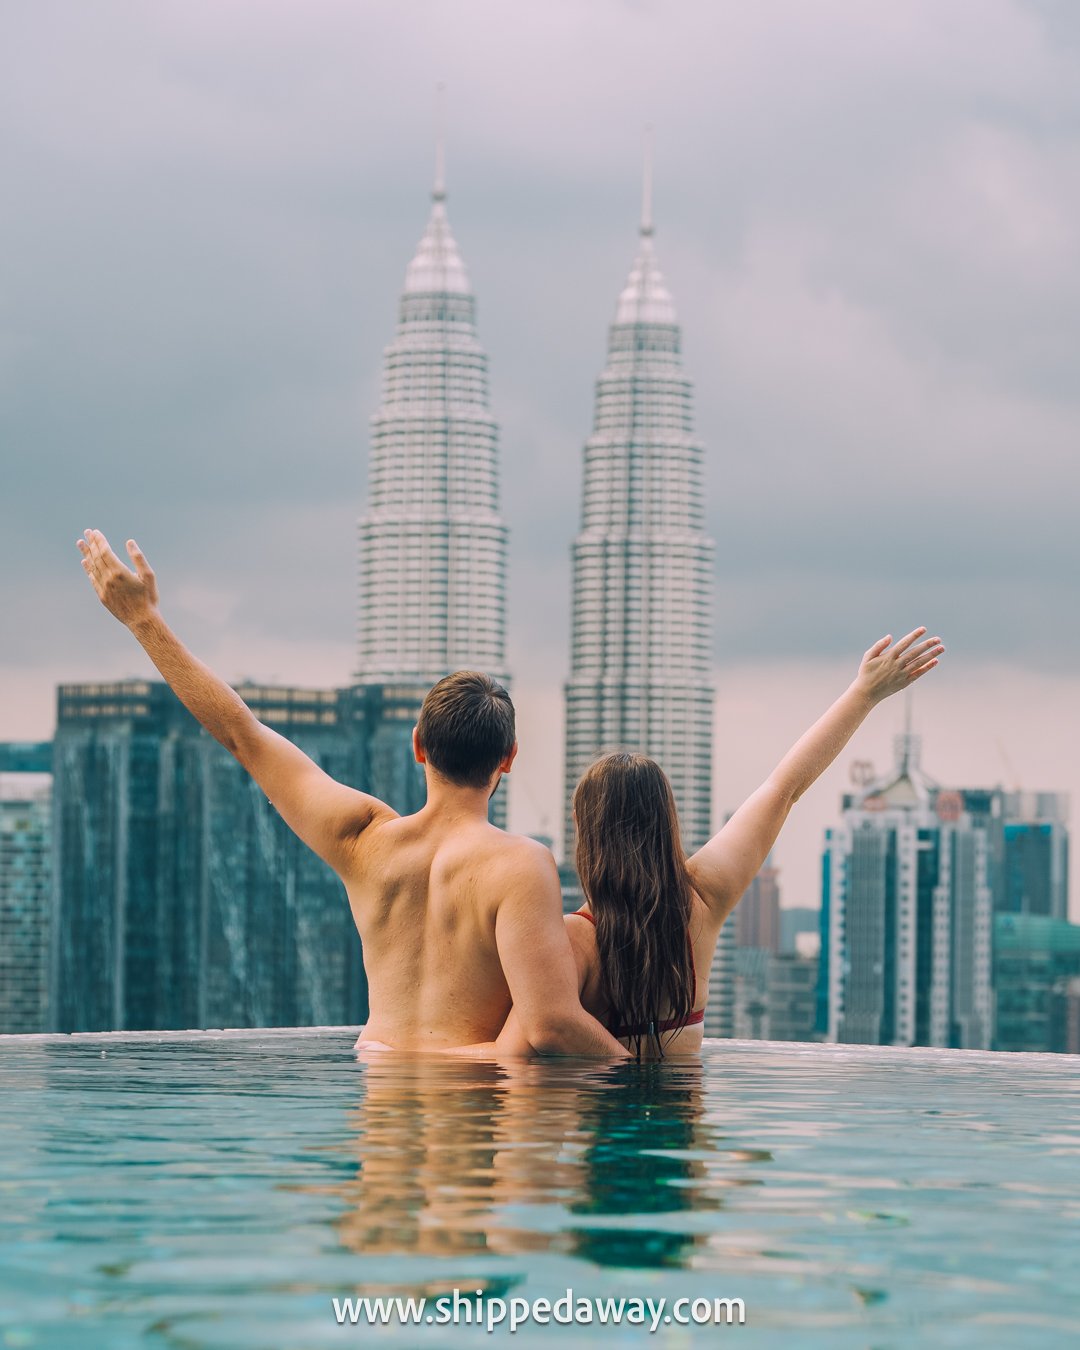 is kuala lumpur worth visiting, what to do in kuala lumpur, kuala lumpur best rooftop pools